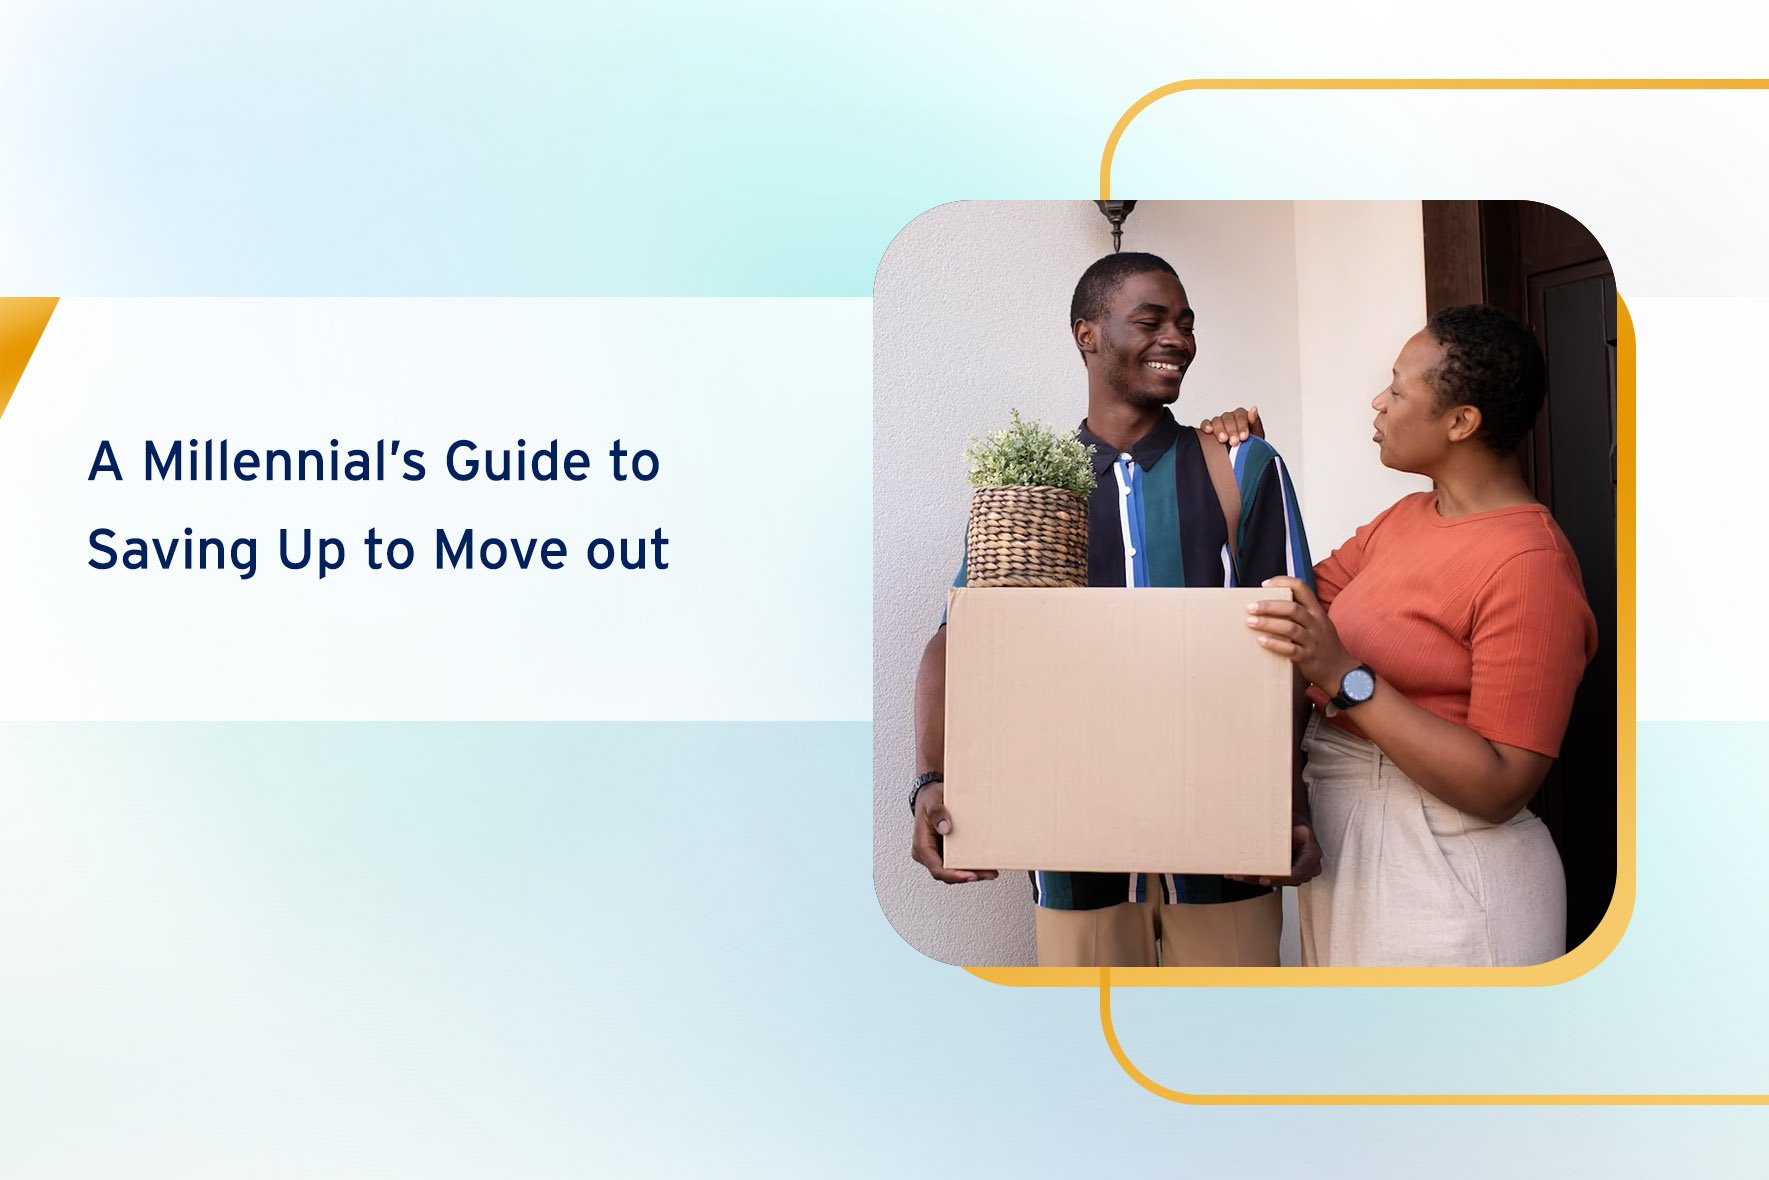 A Millennial’s Guide to Saving Up to Move Out